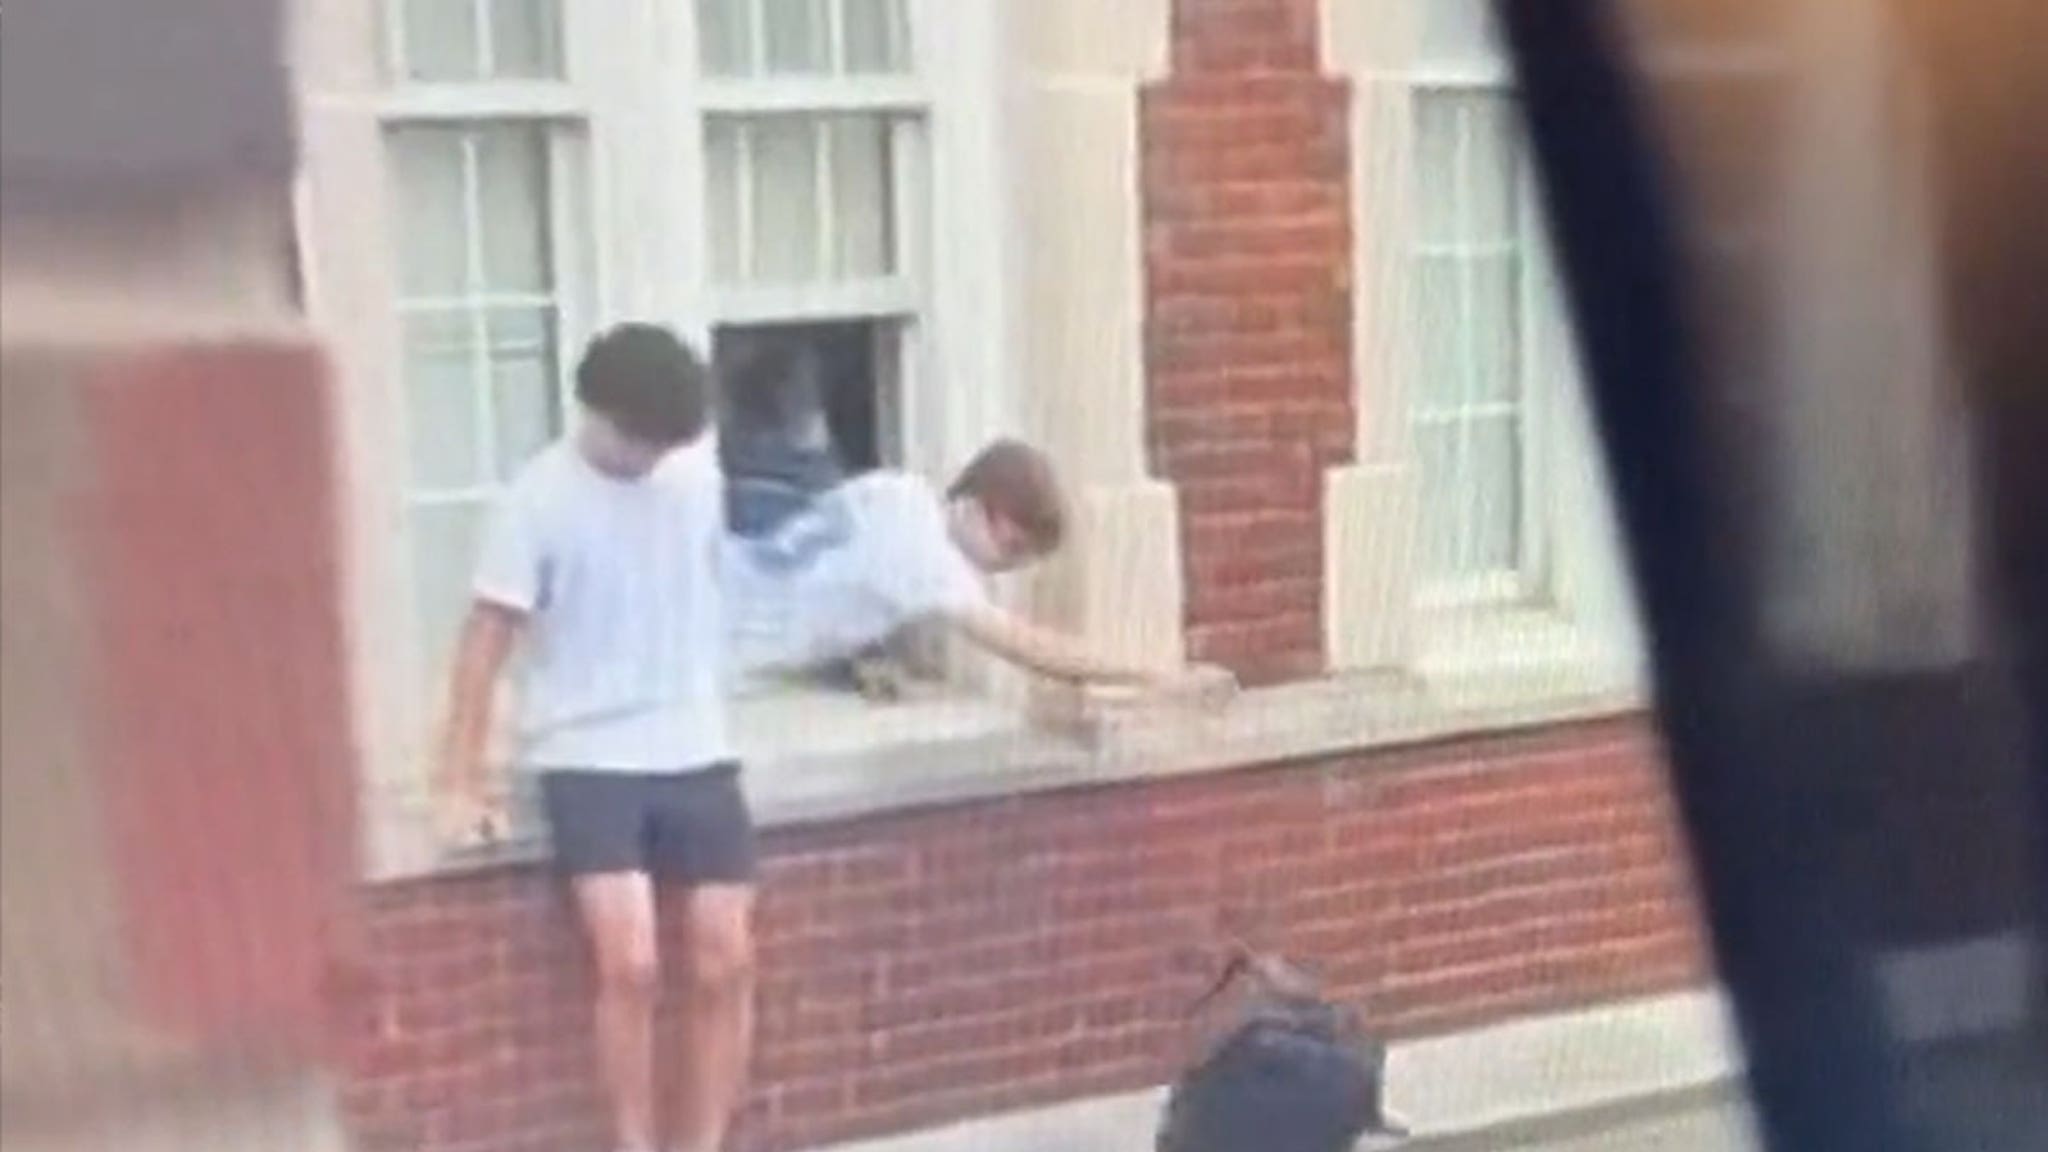 UNC Students Jump Out of Building After Shooting, Suspect in Custody